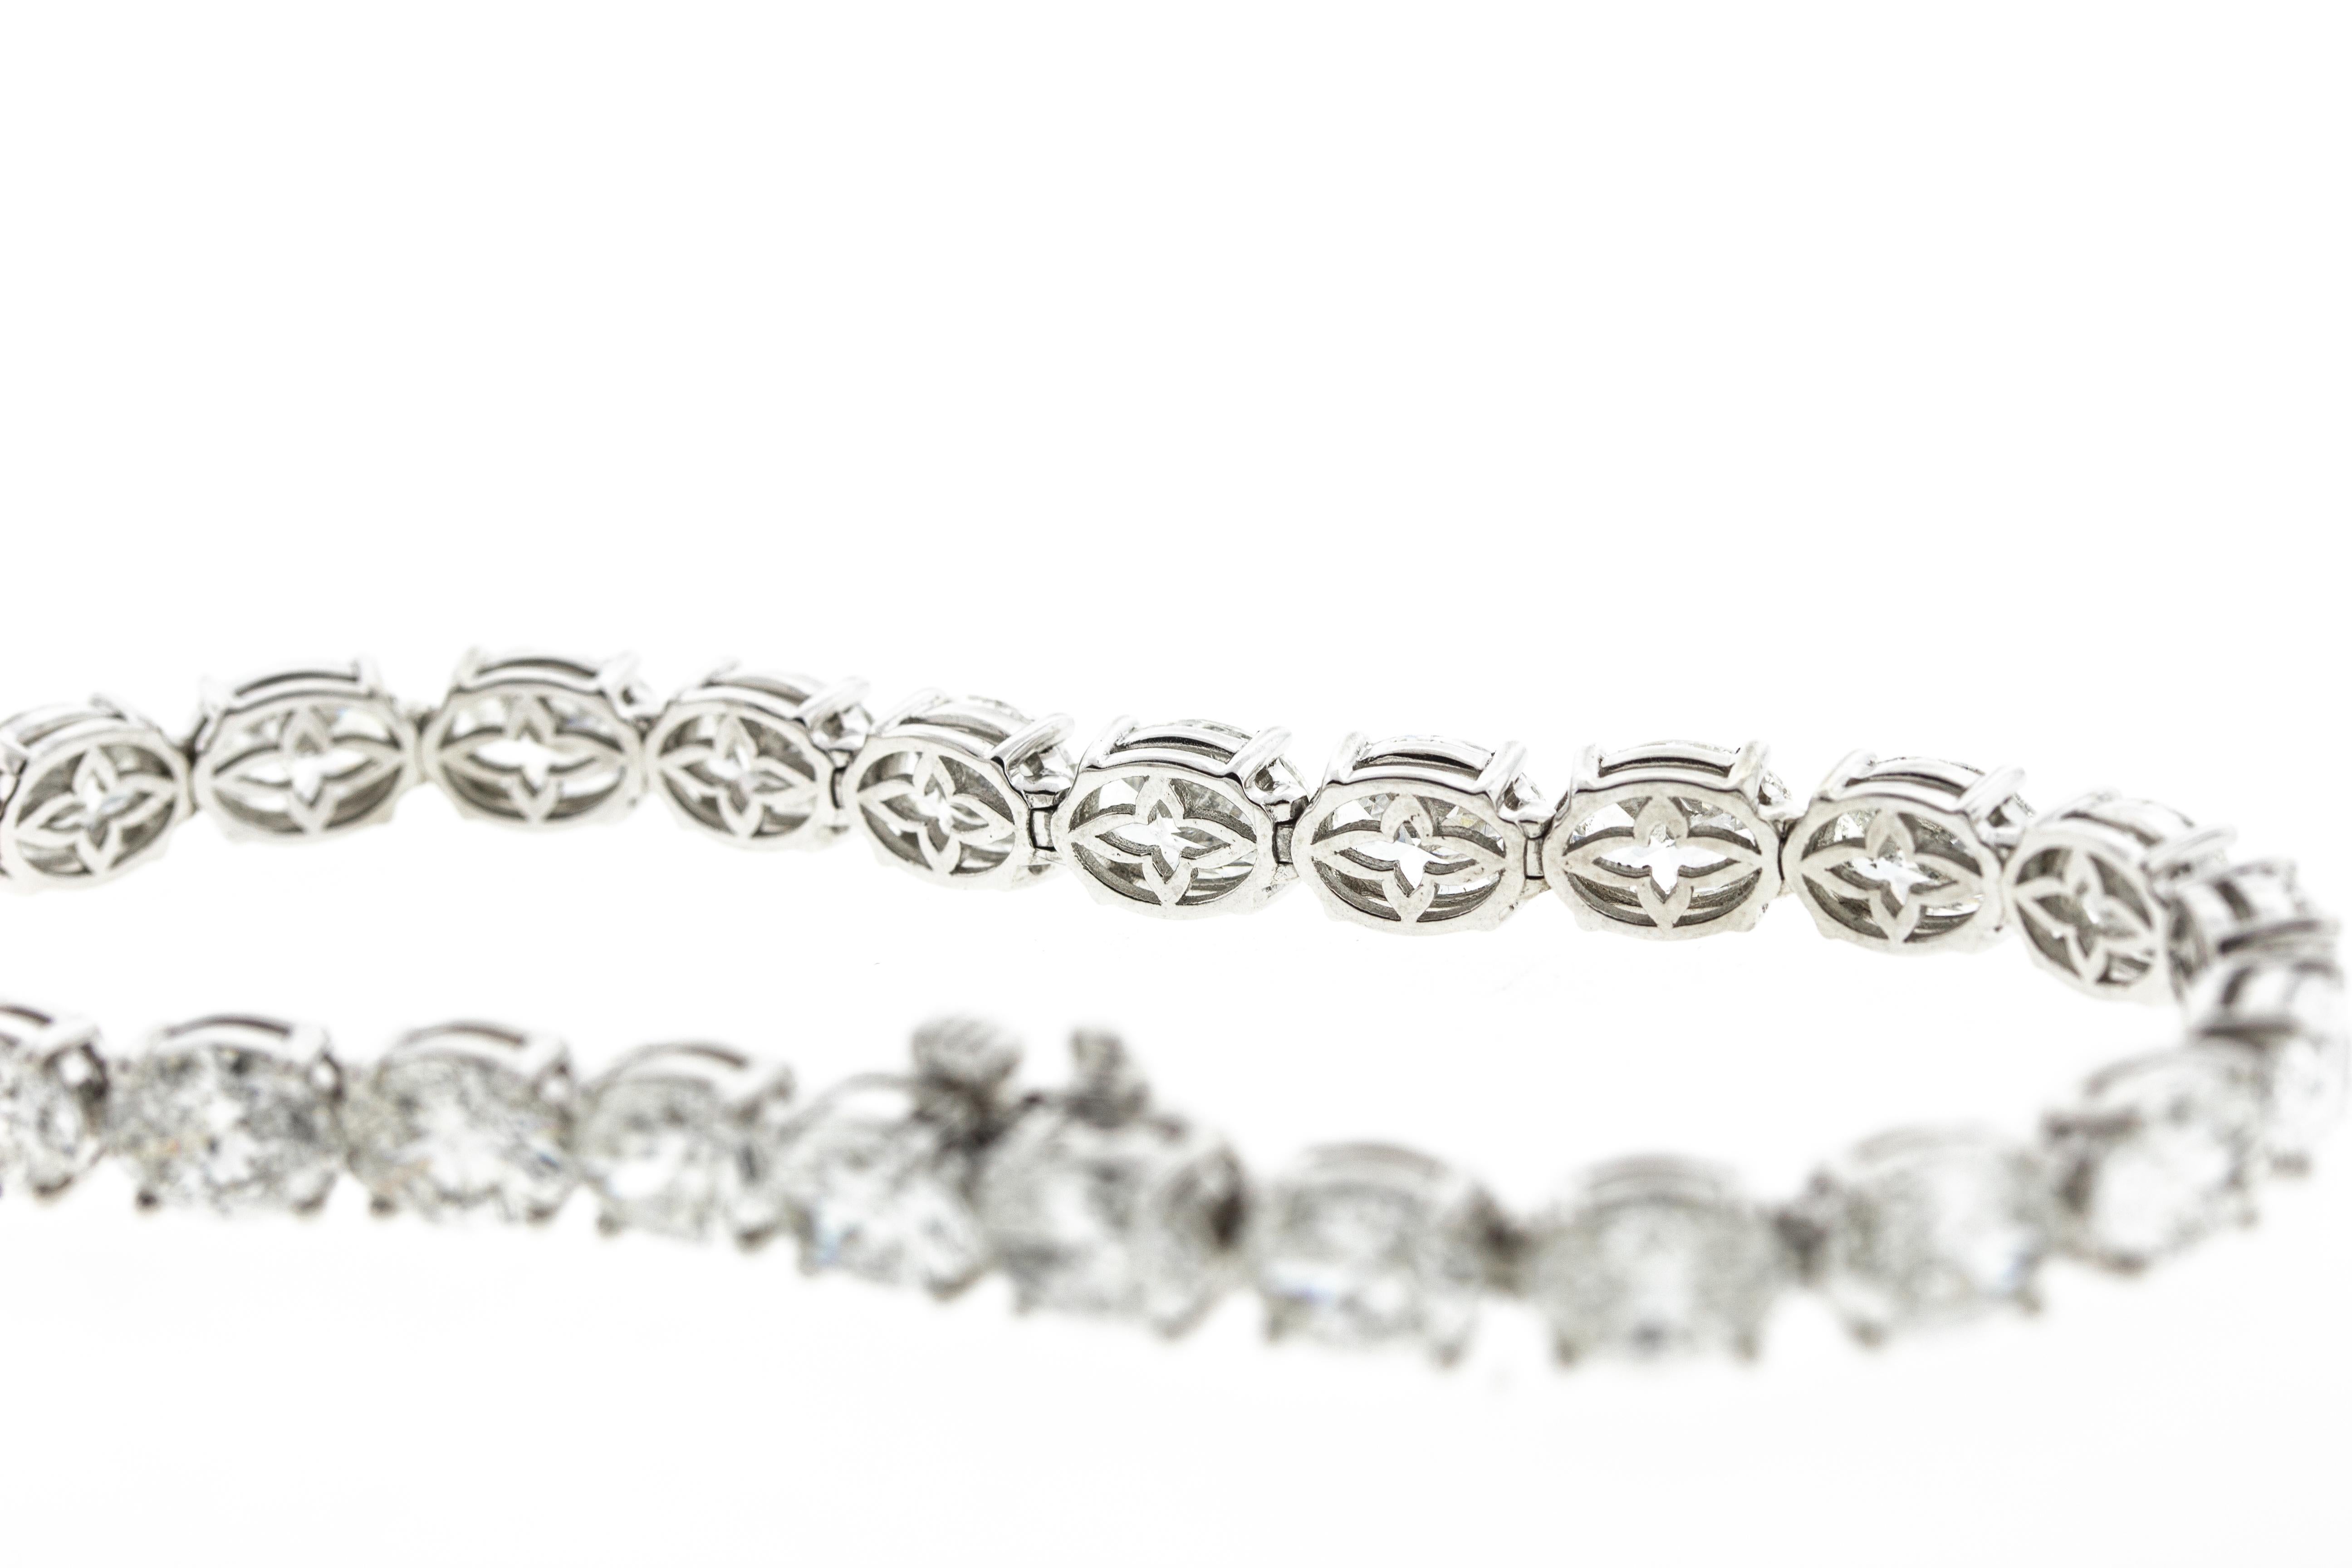 This diamond tennis bracelet is made in platinum and features 25 oval diamonds for a total carat weight of 7.97 carats. 